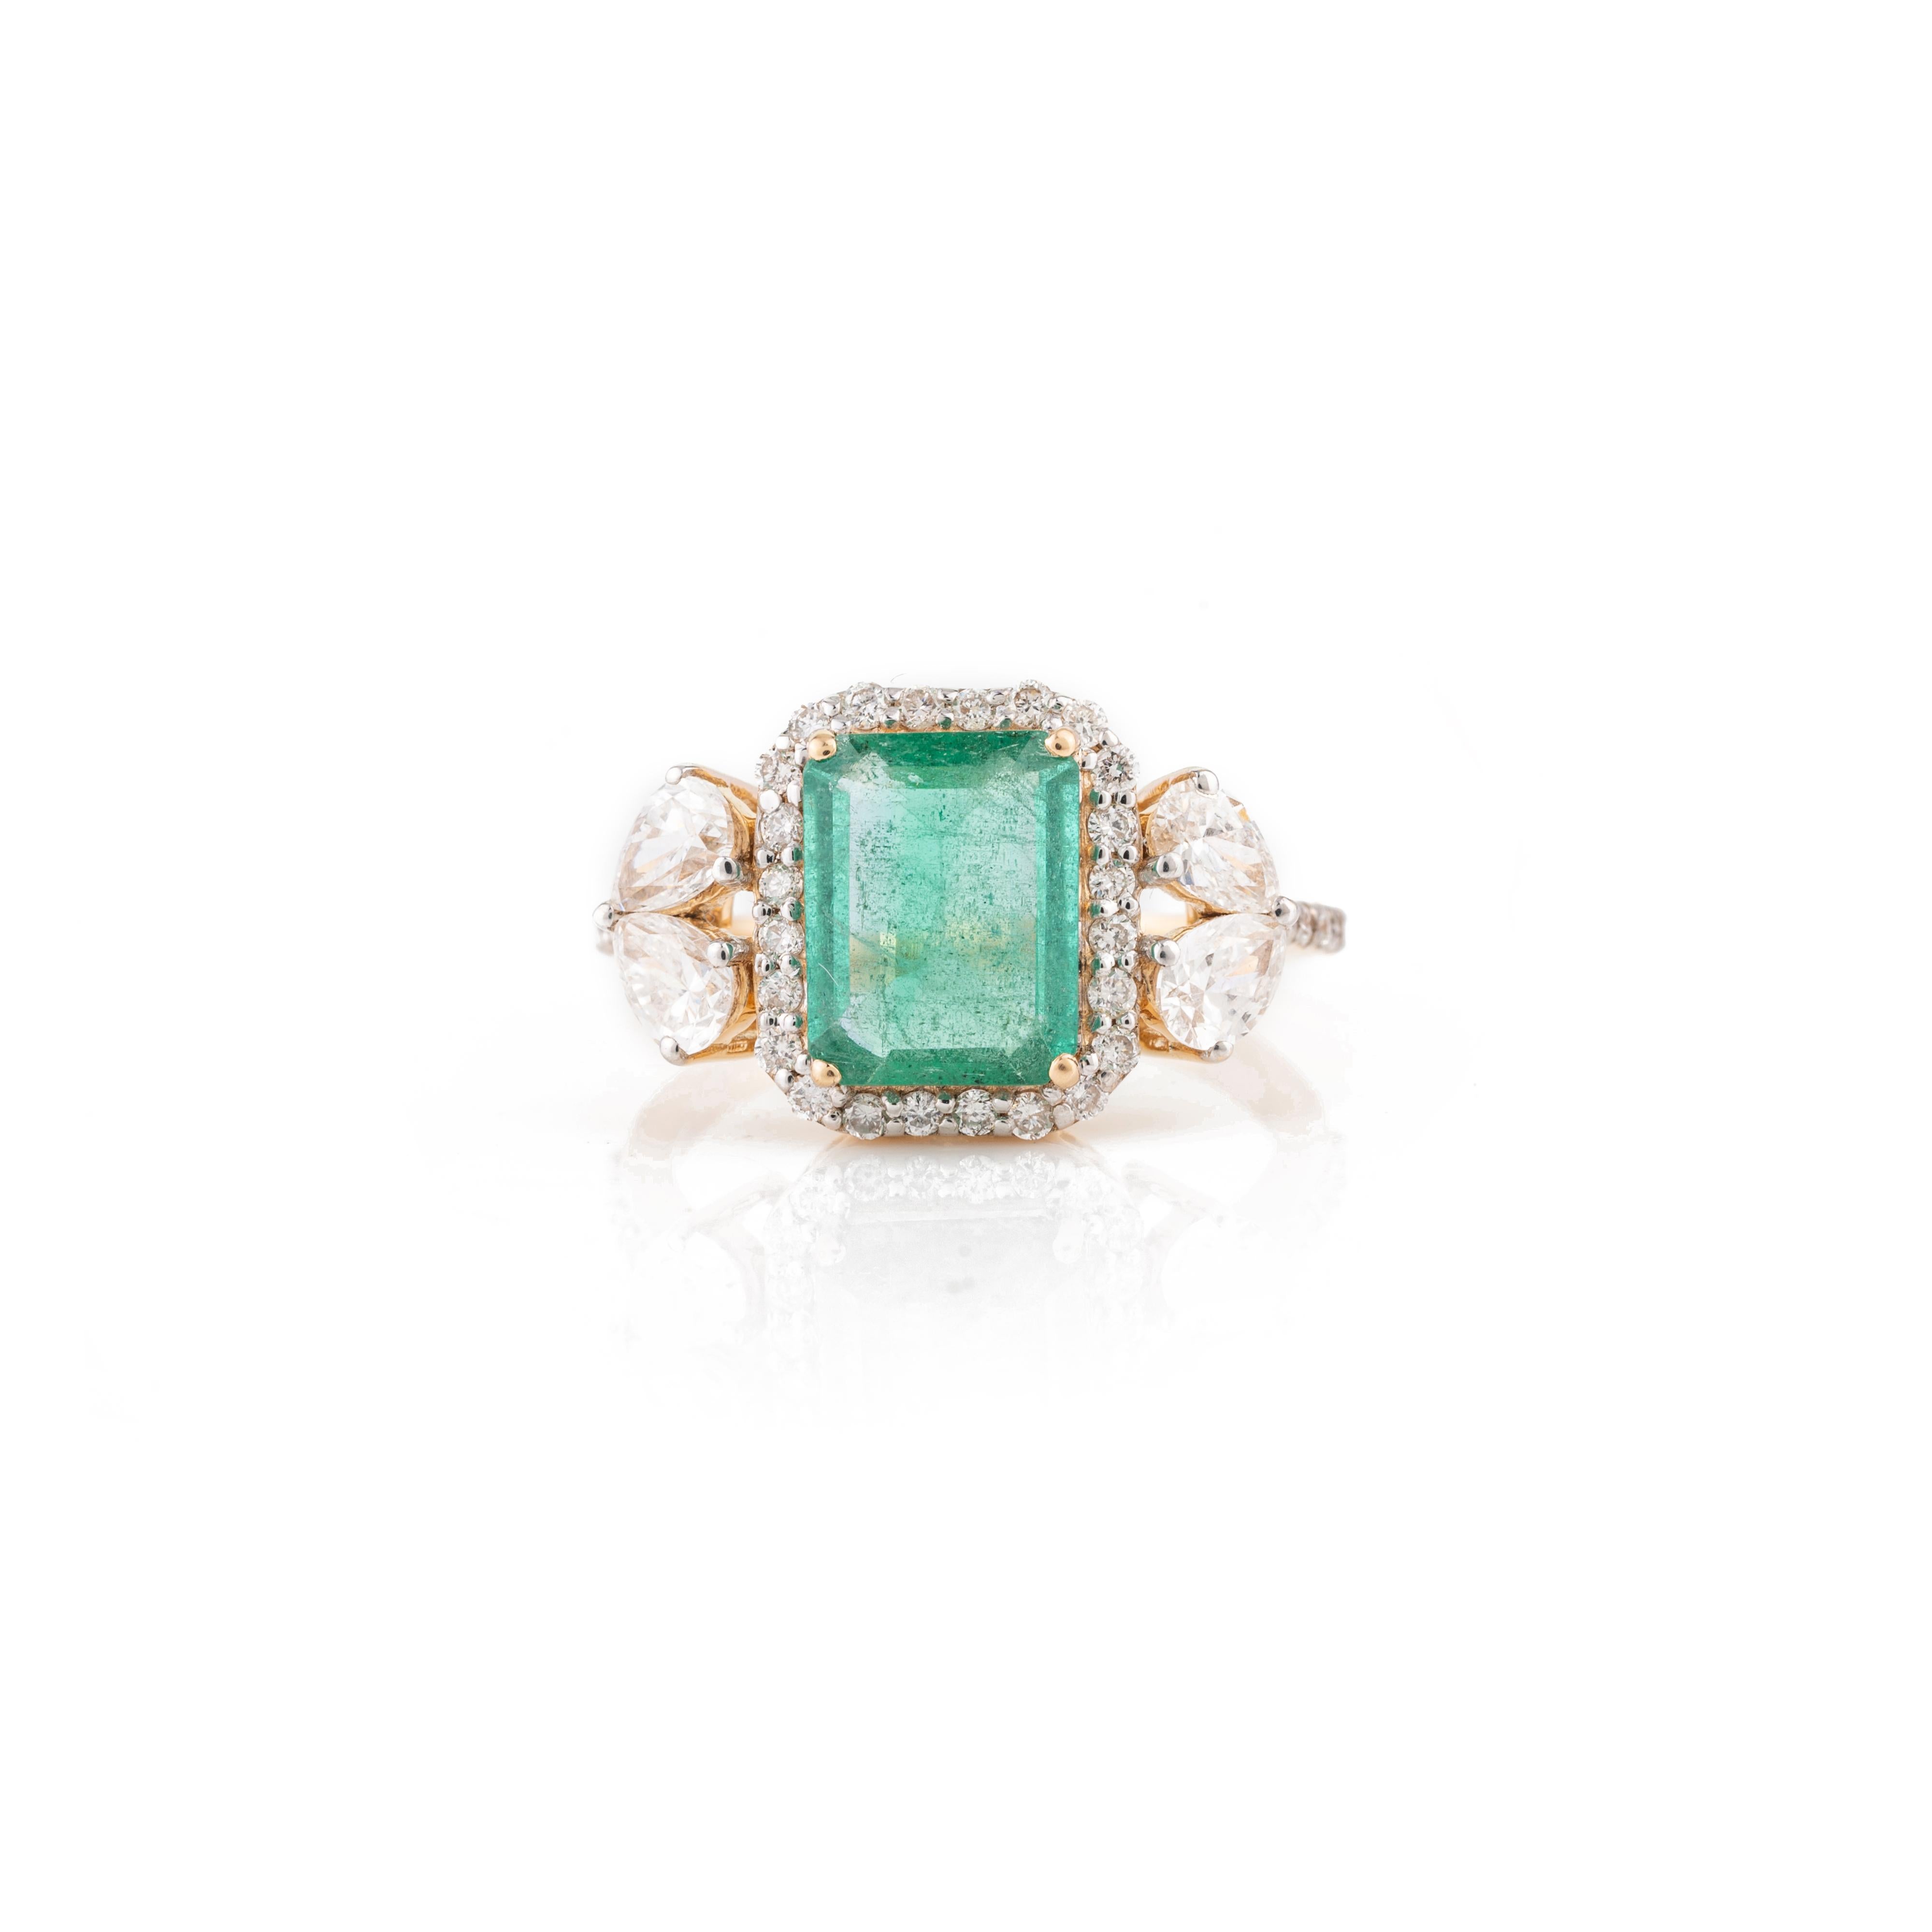 For Sale:  Designer Emerald Birthstone Diamond Big Cocktail Ring in 18k Solid Yellow Gold 2